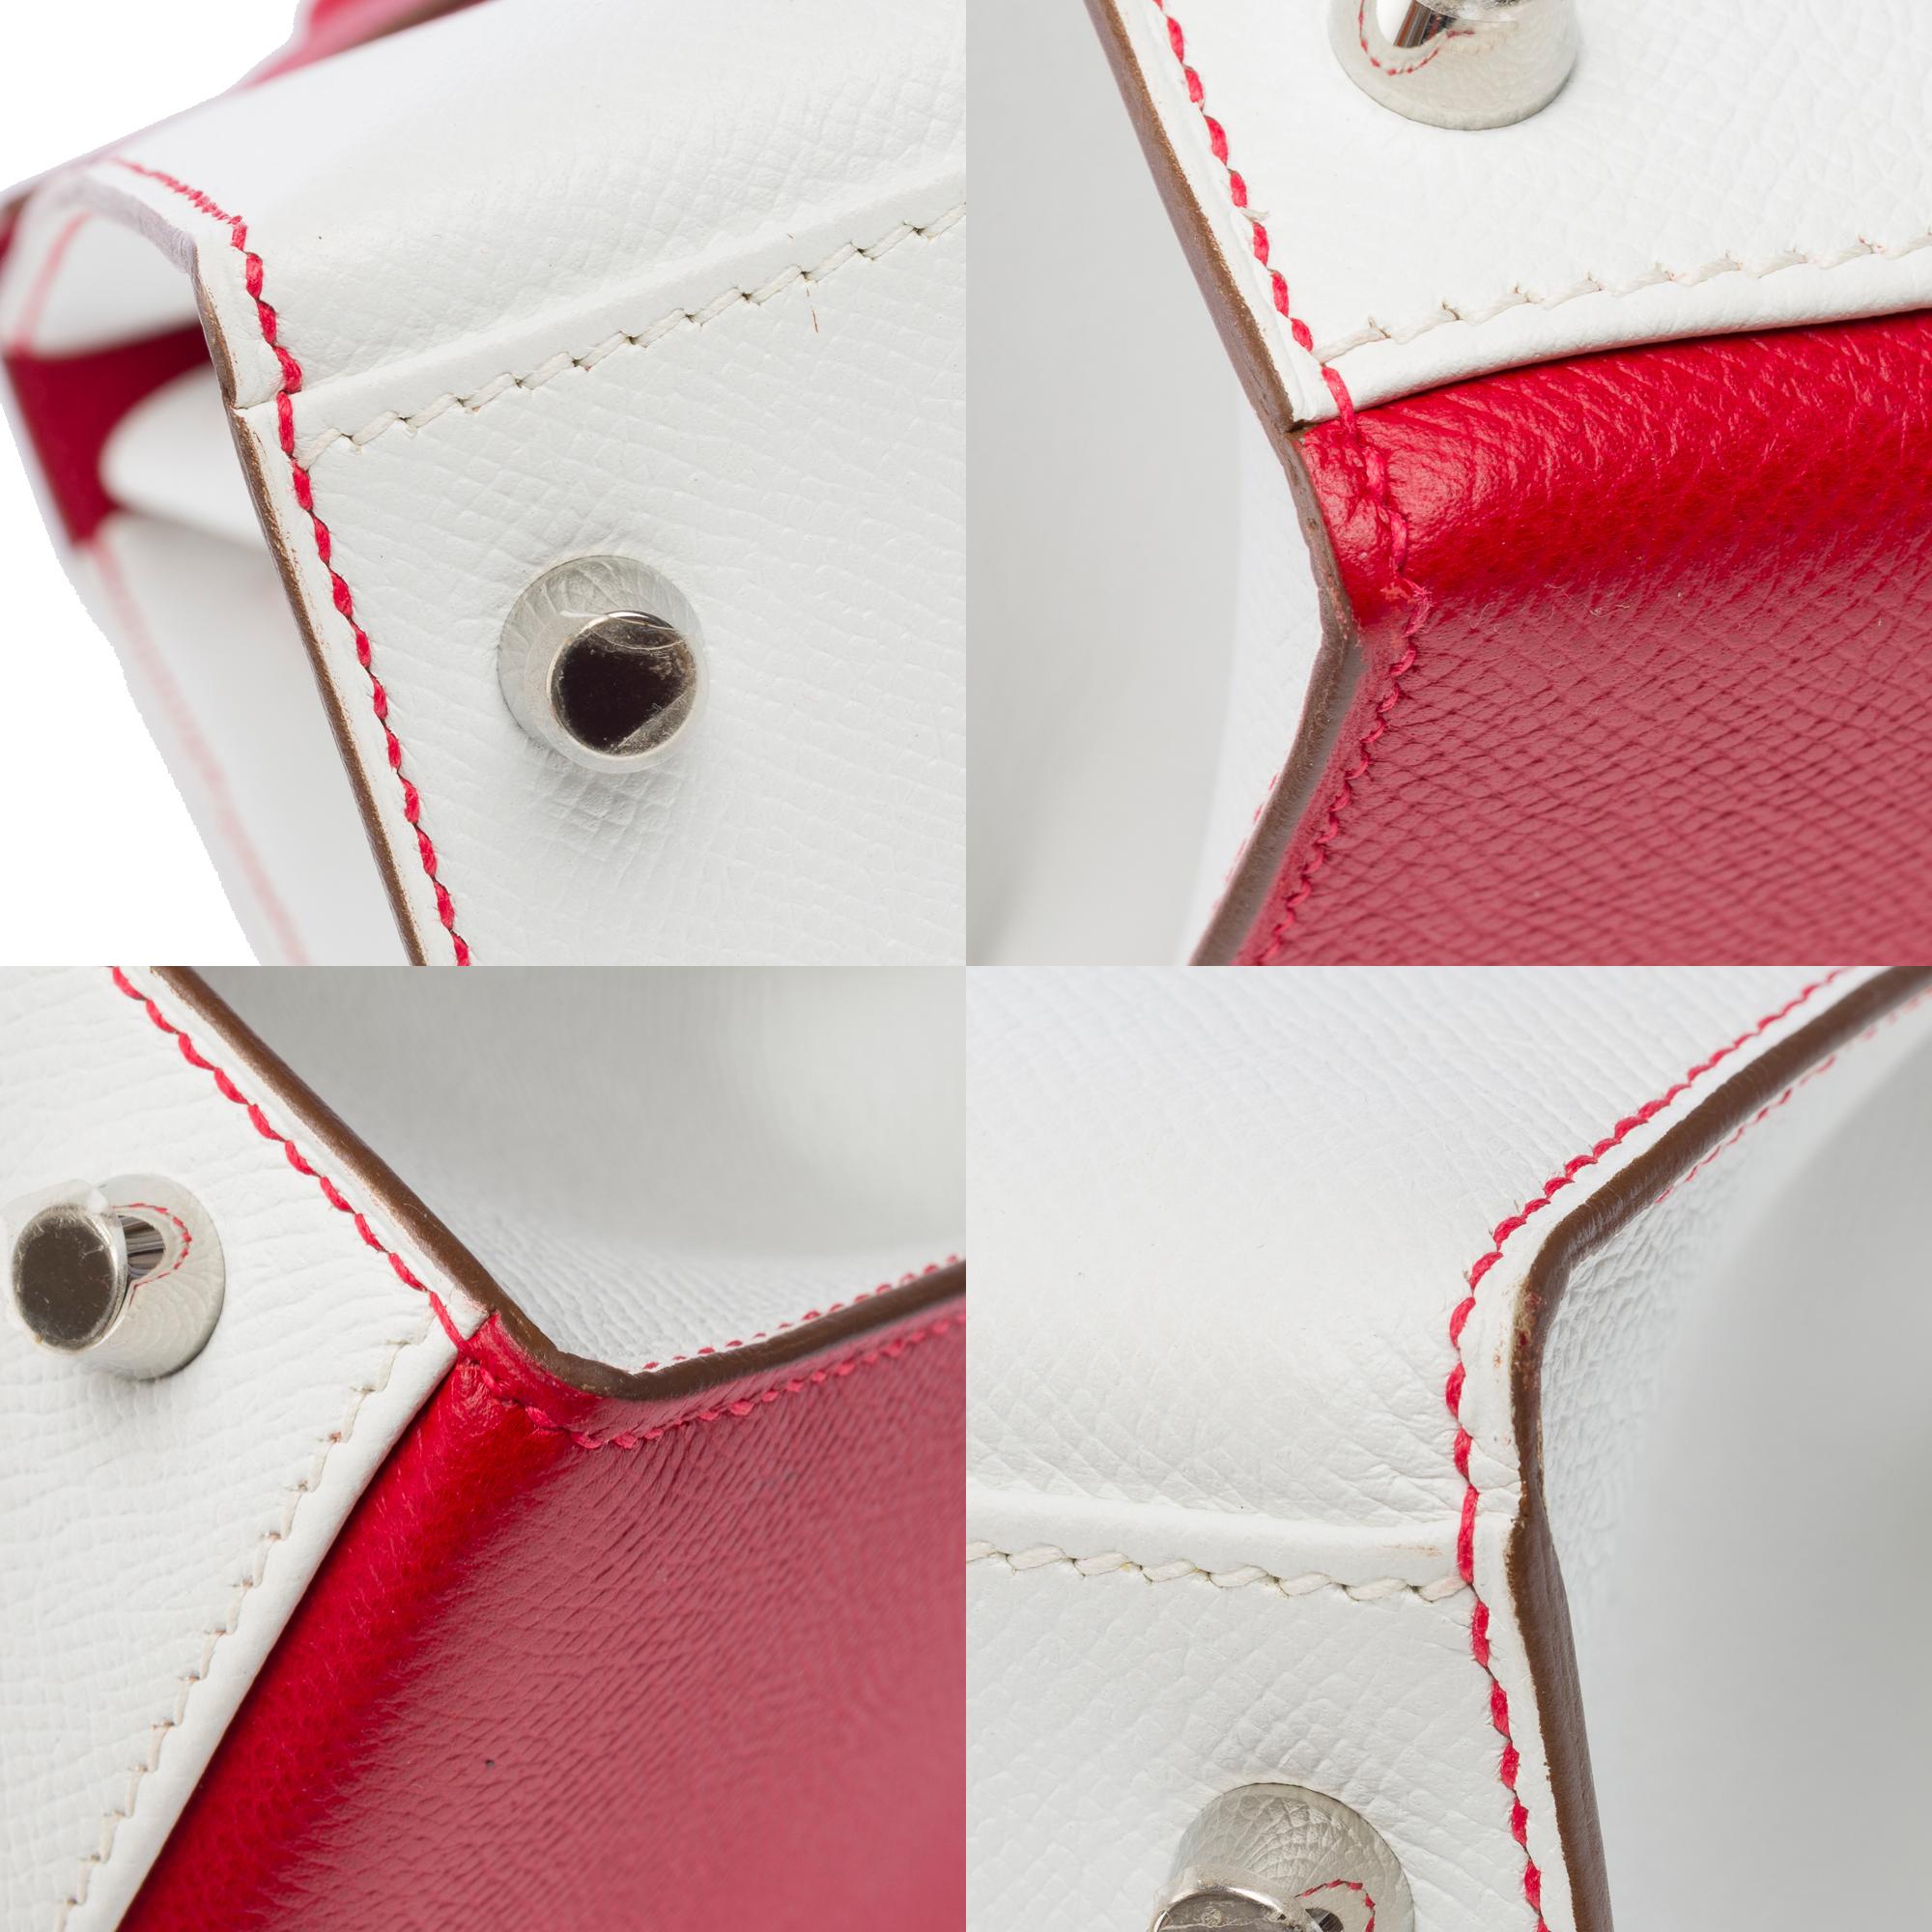 Flag limited edition Hermès Kelly 32  handbag strap in red and white epsom, PHW 7